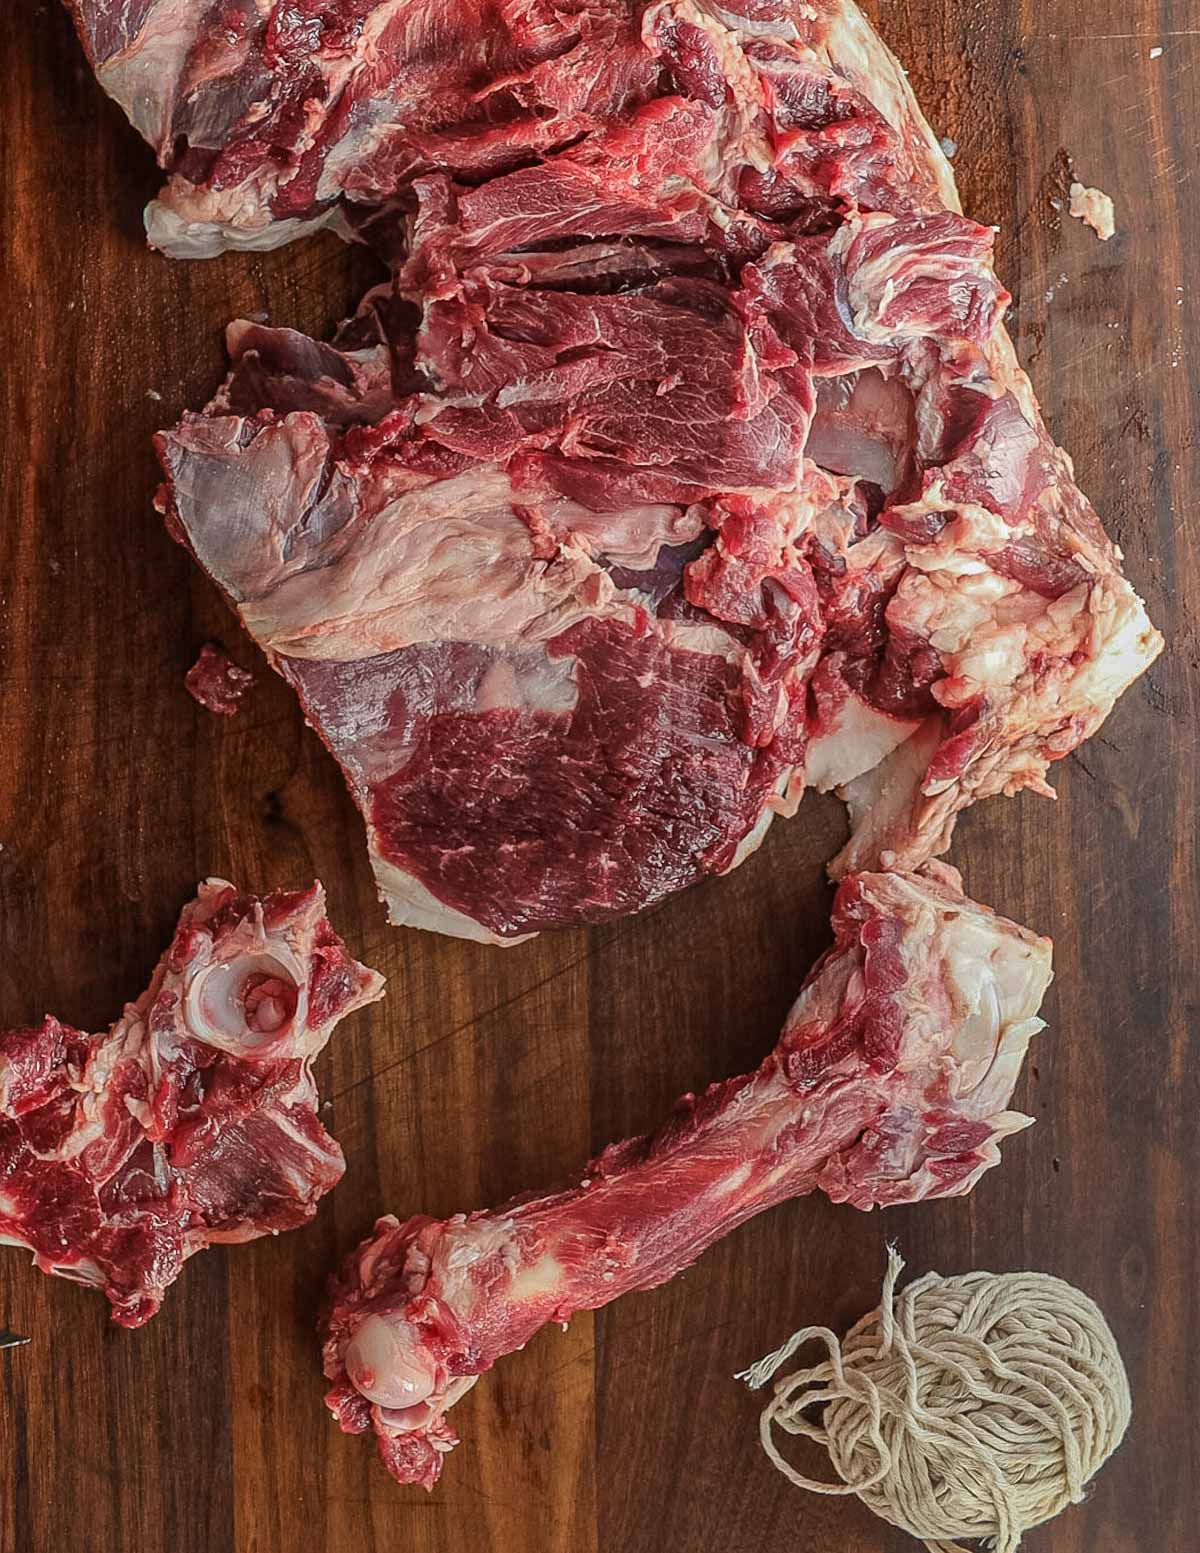 A leg of lamb cut open with the bones removed.